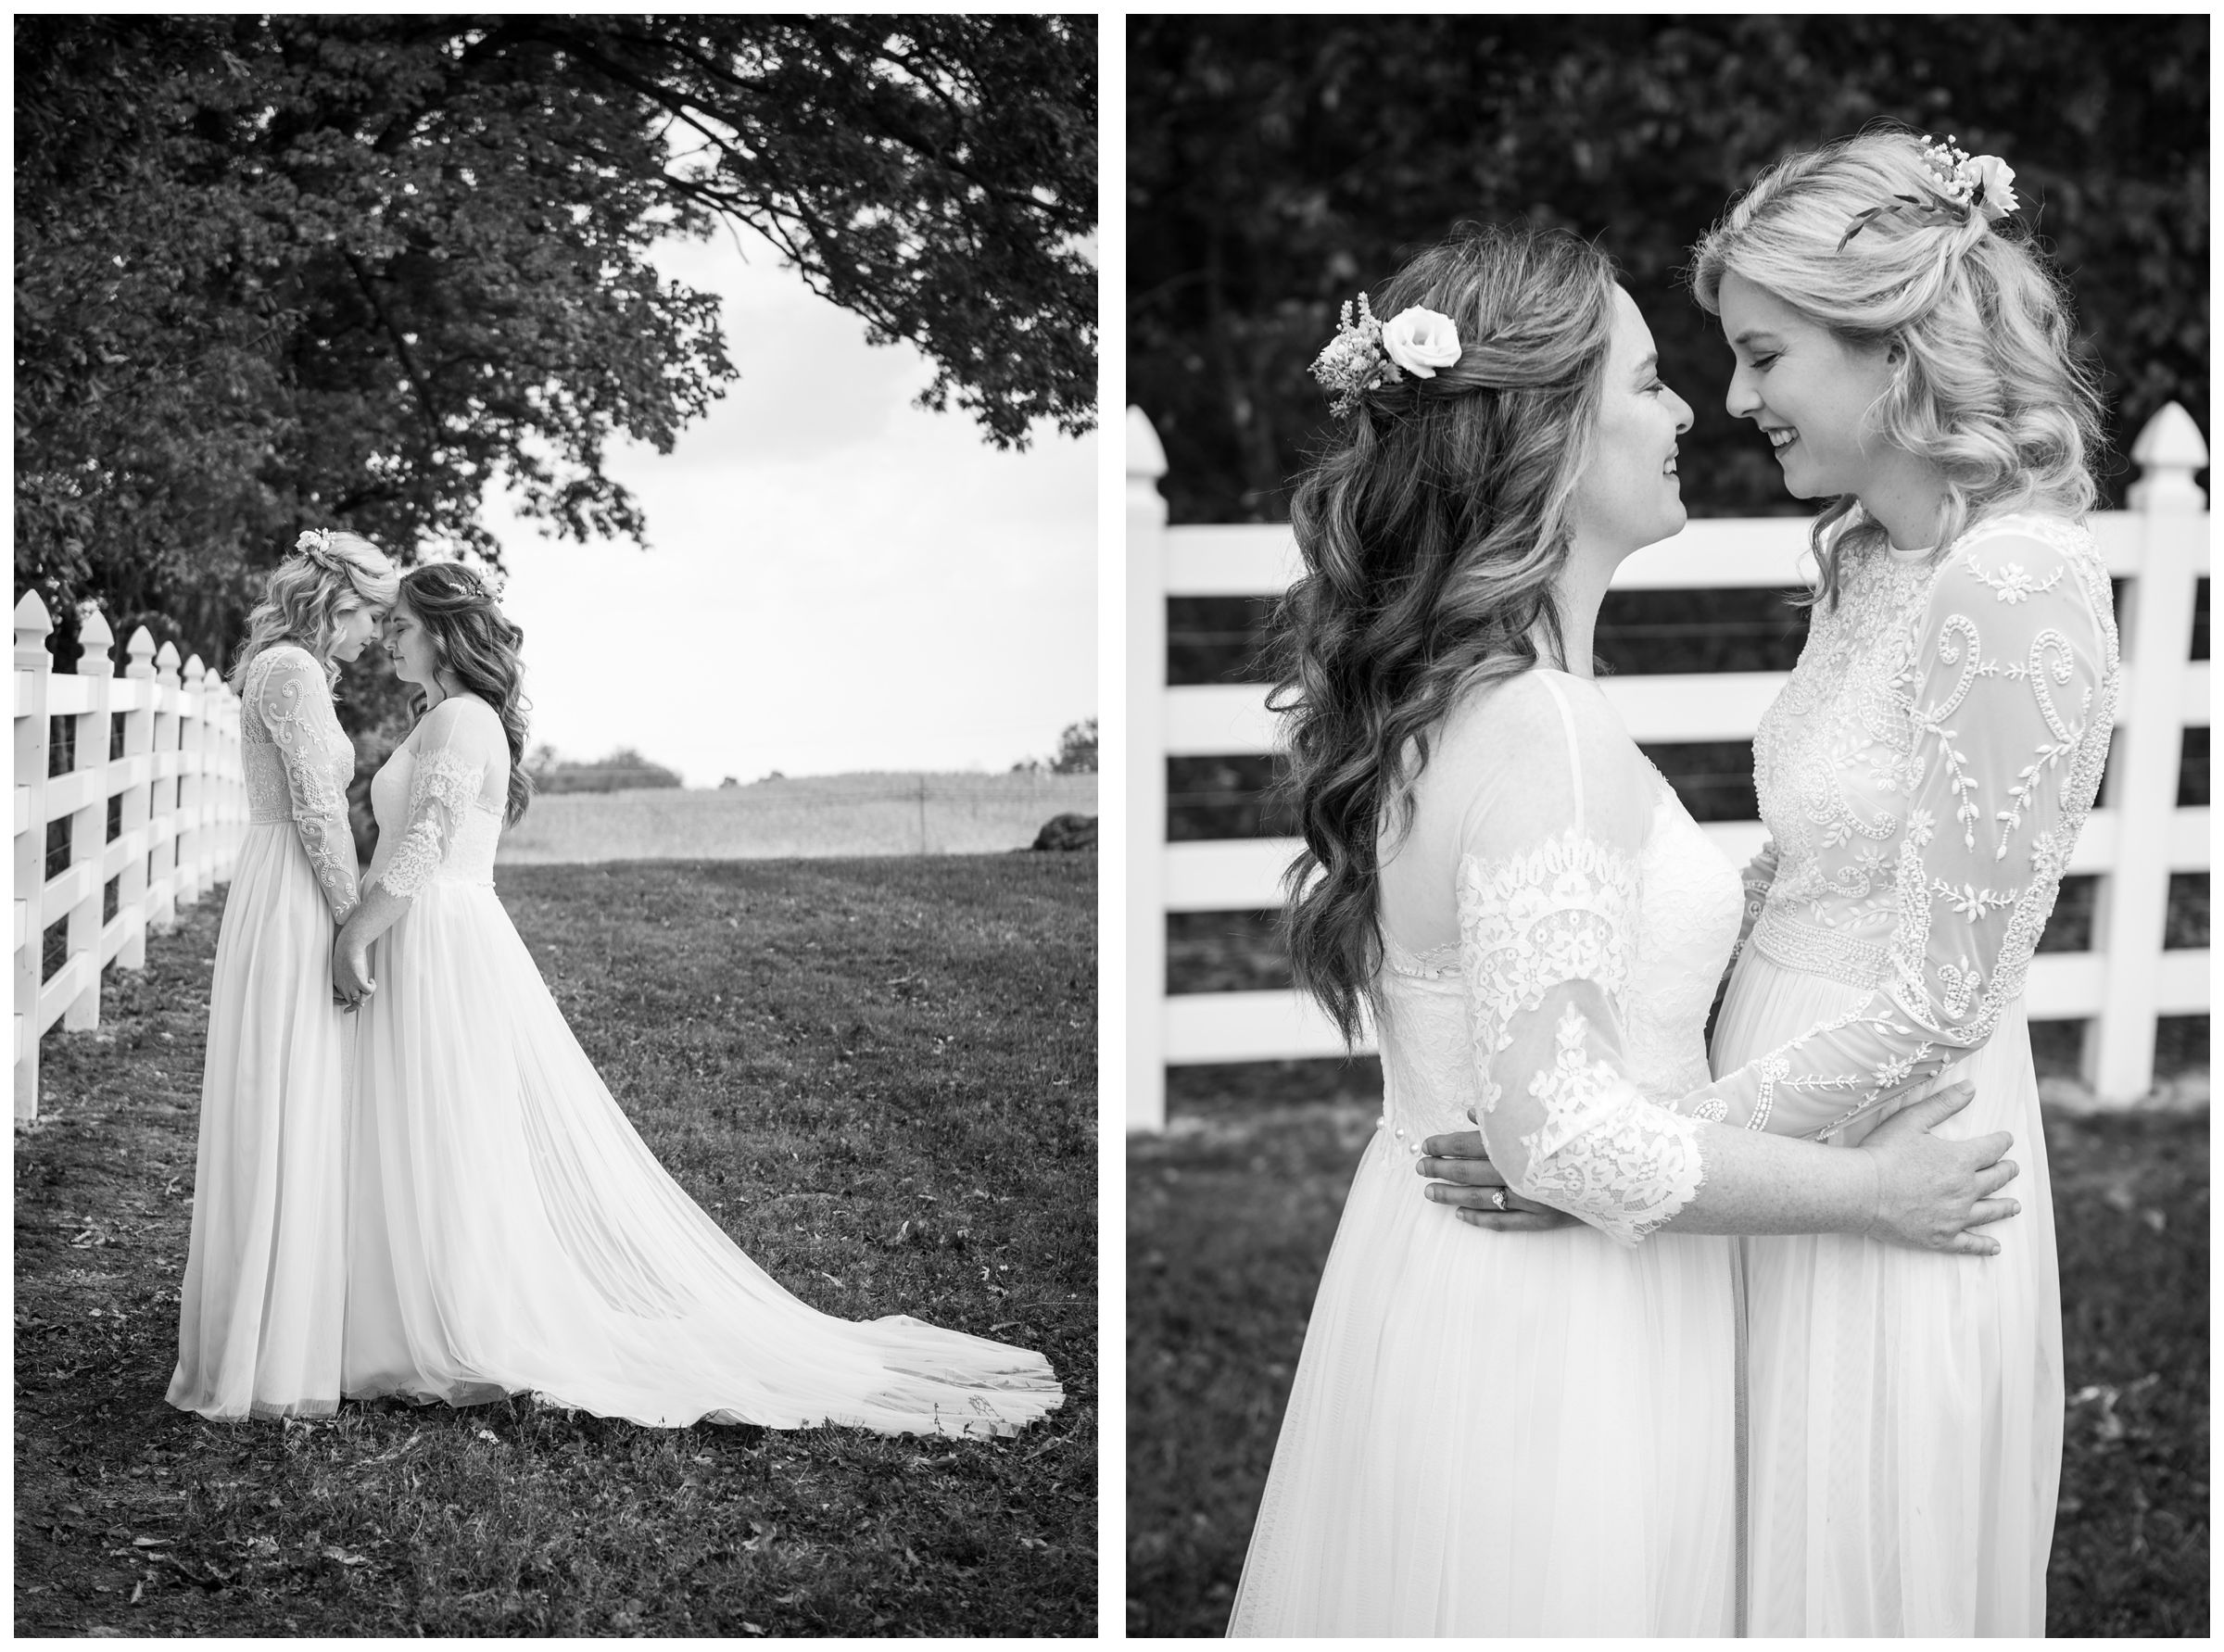 black and white images of lesbian couple on wedding day.